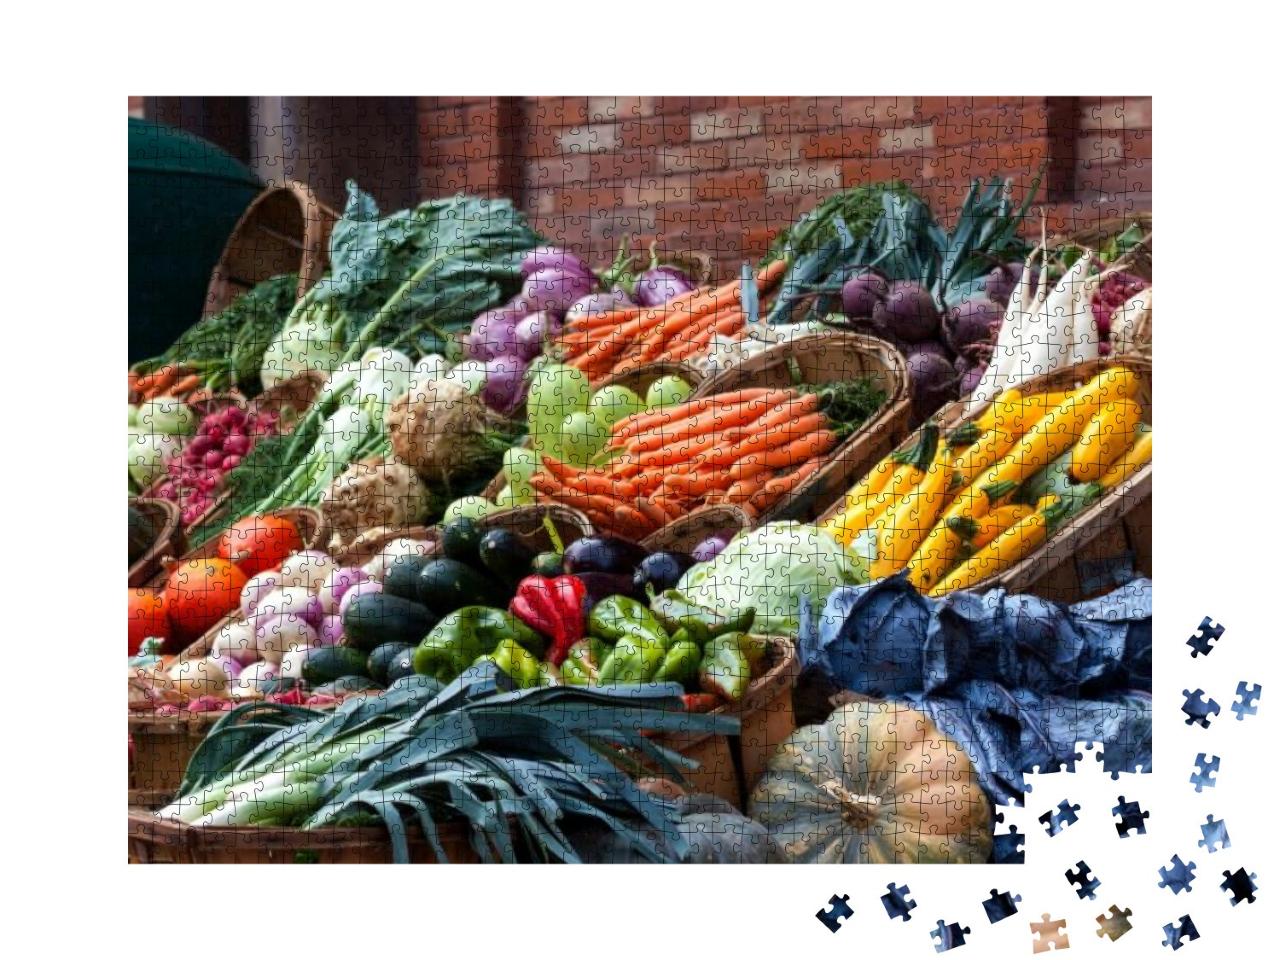 Fruits & Vegetables At a Market in France... Jigsaw Puzzle with 1000 pieces